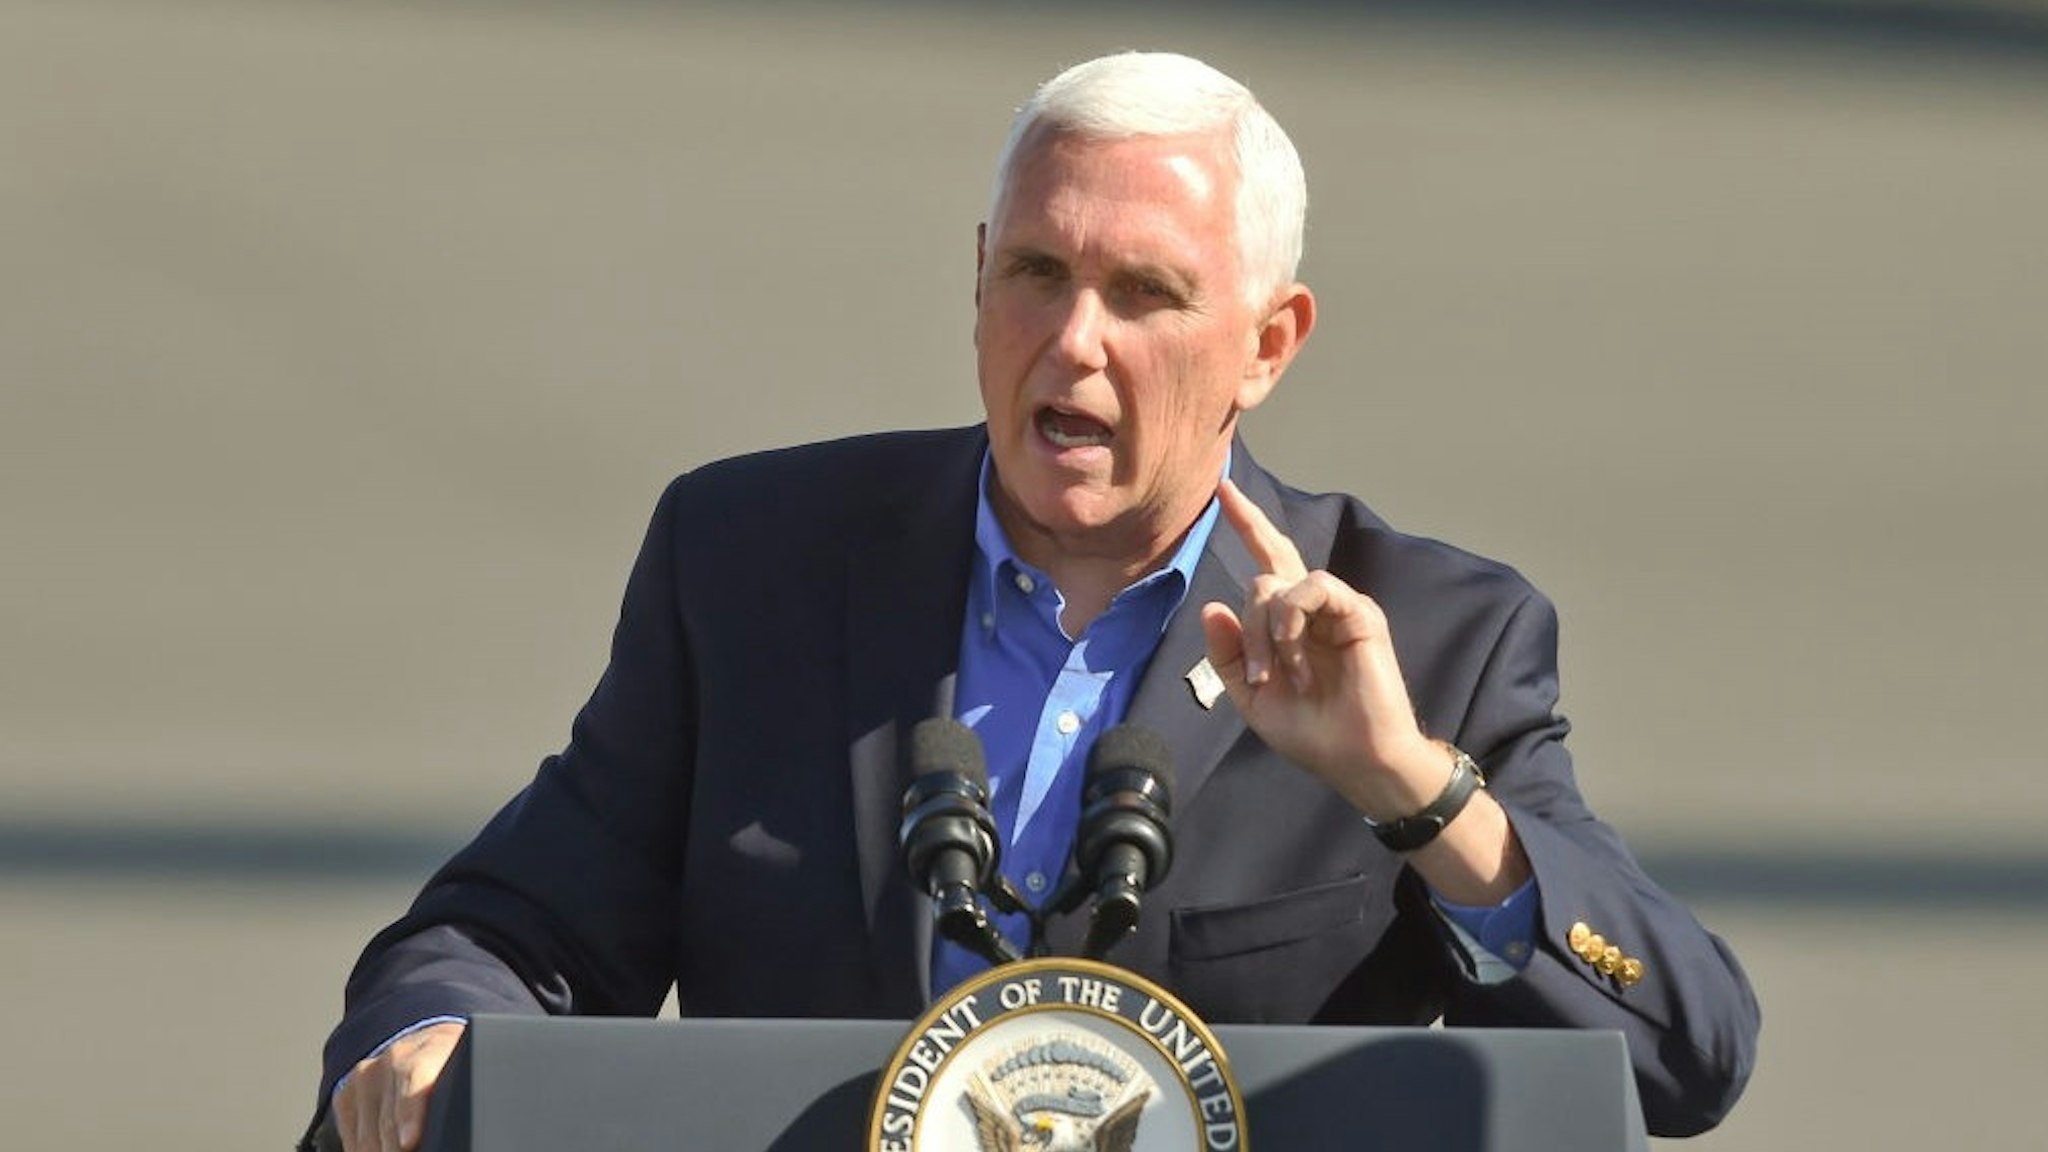 Bern Township, PA - October 17: Vice President Mike Pence speaks to the crowd. At the Reading Regional Airport in Bern township Saturday October 17, 2020 where Vice President Mike Pence made a stop in Air Force 2 for a campaign rally. (Photo by